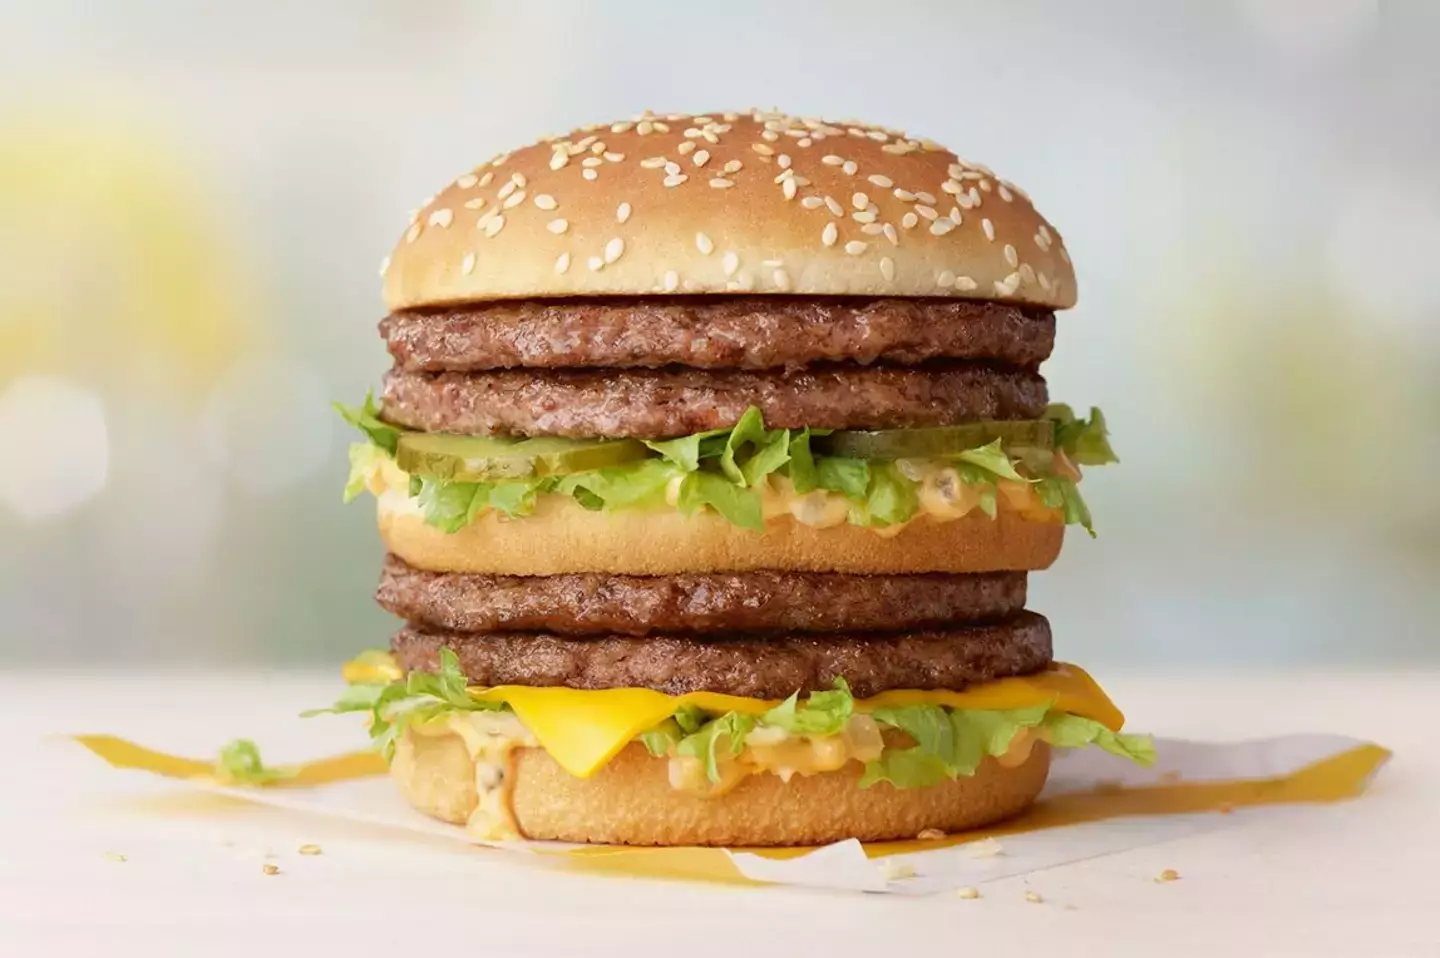 I'd call it a whopper, only Burger King have already trademarked that for their menu. (McDonald's)